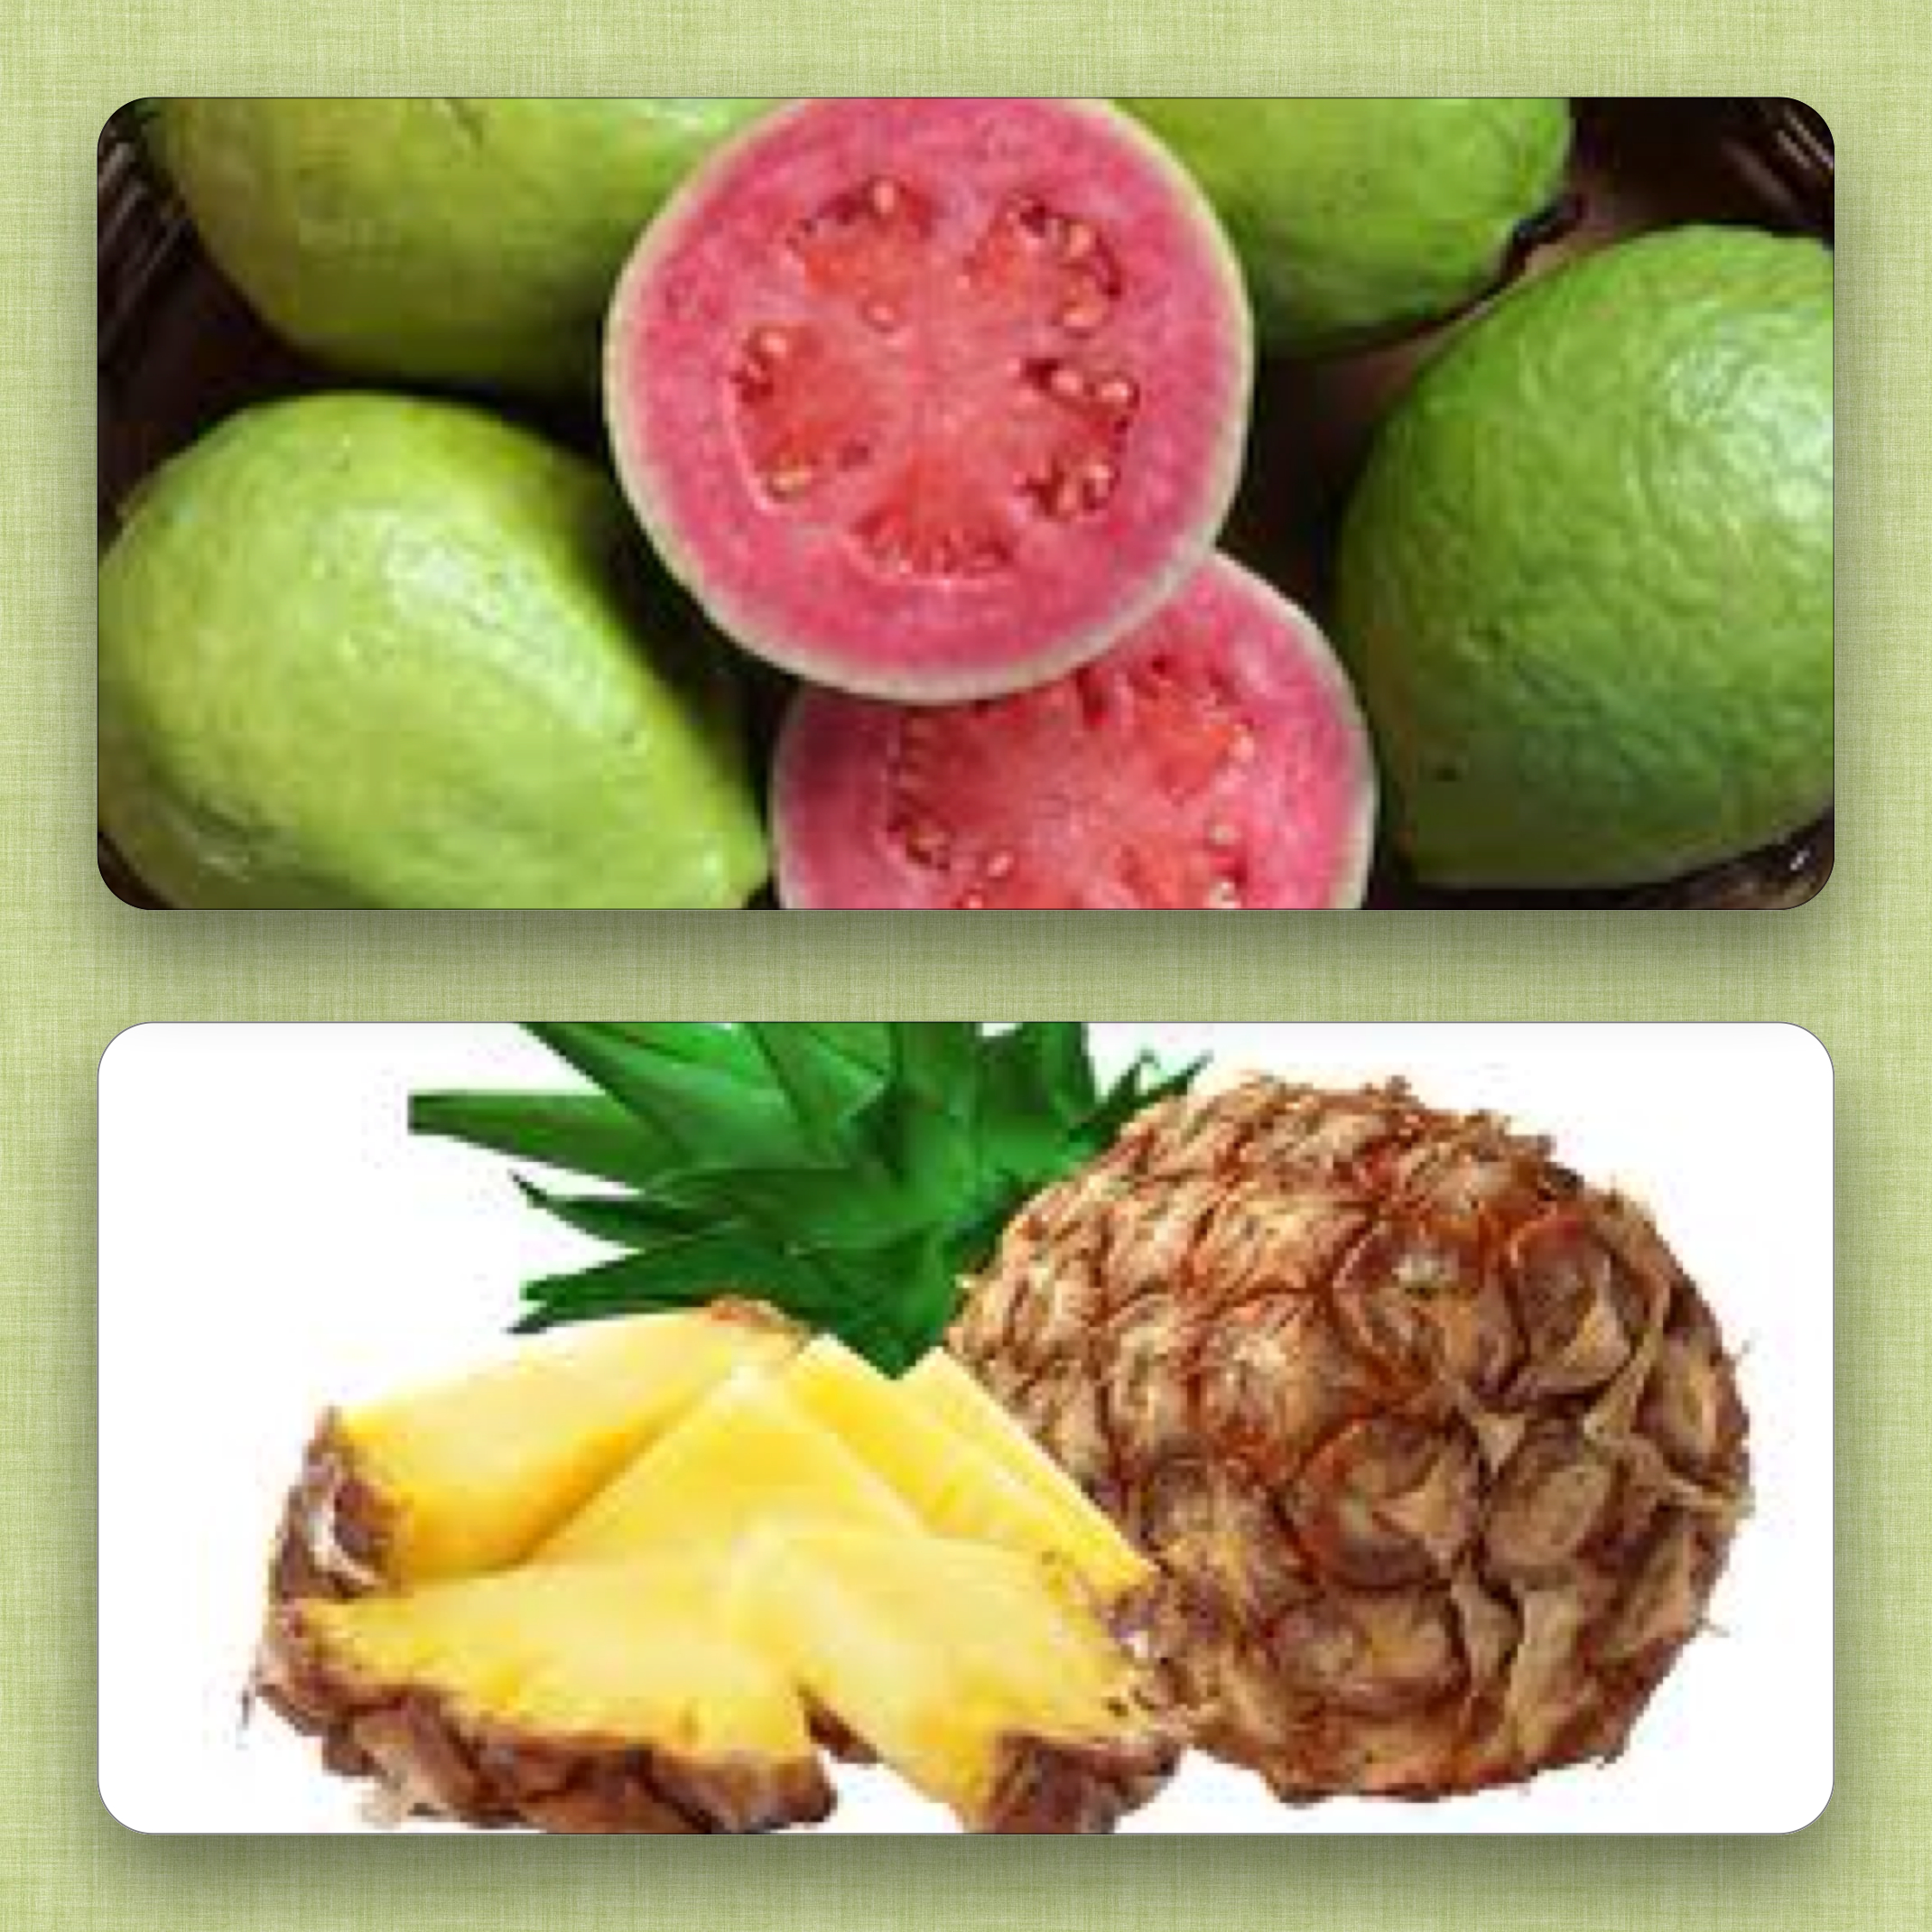 Guava and pineapple